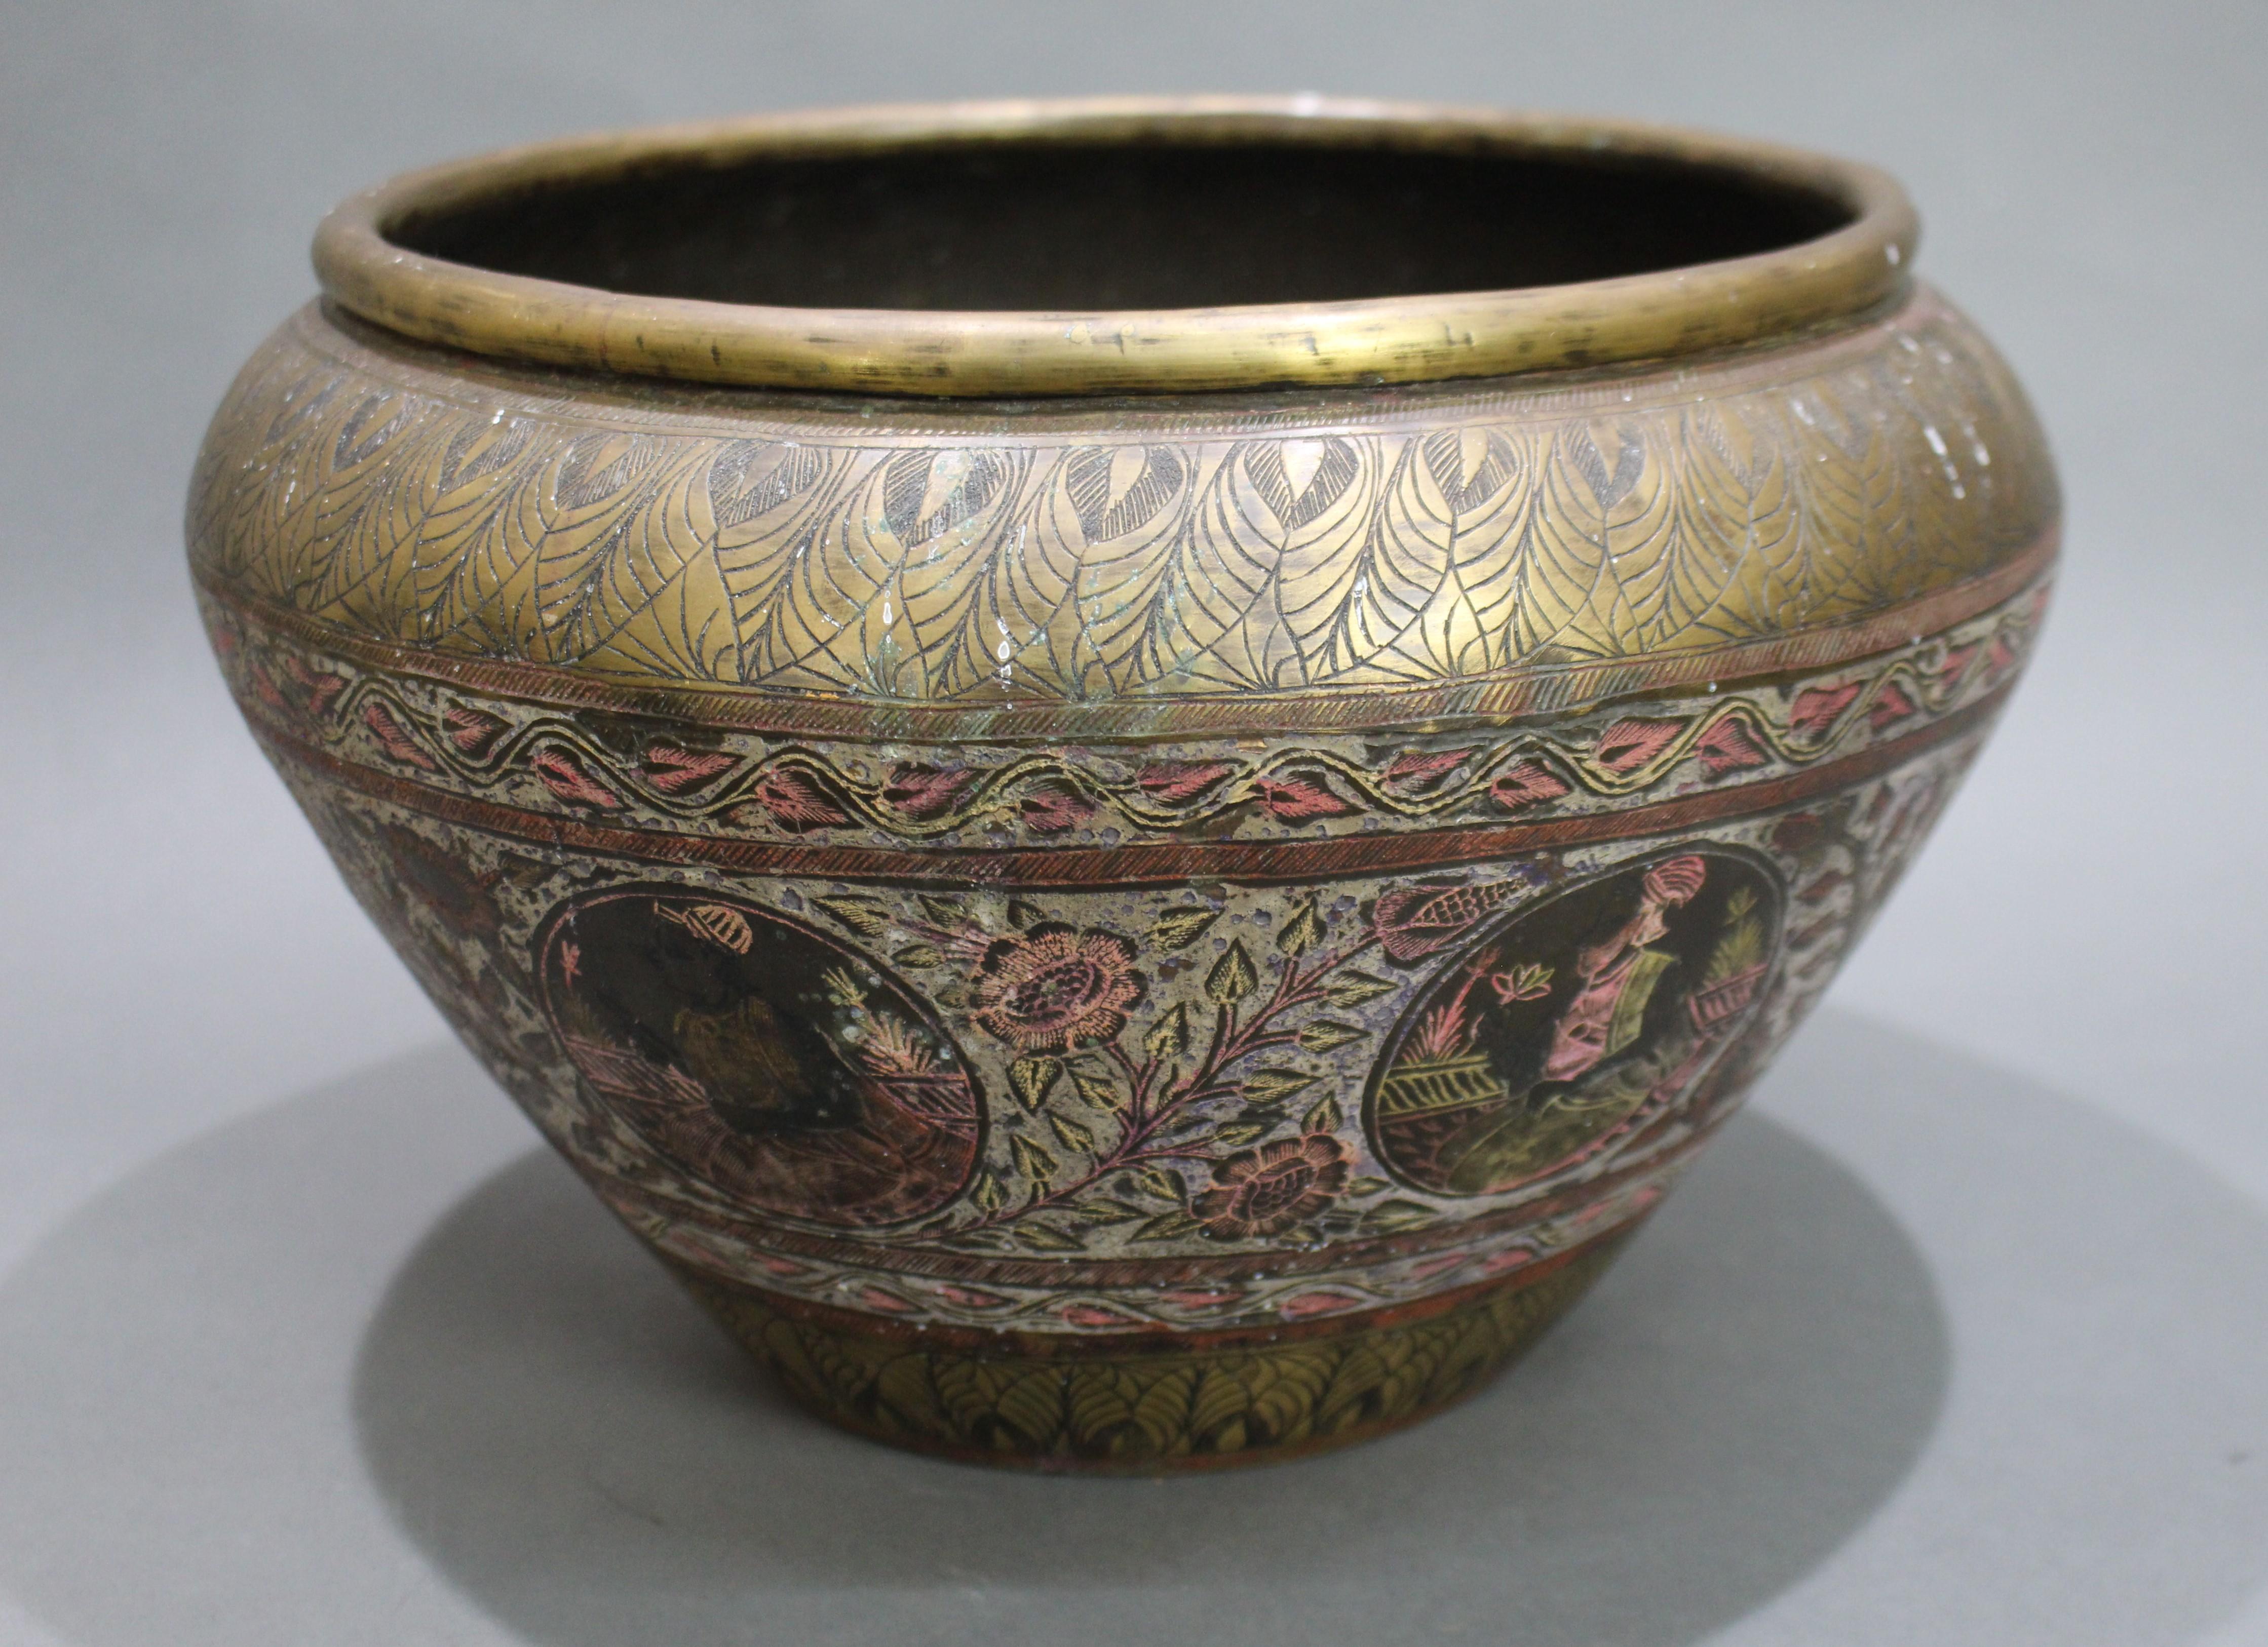 Large Antique Indian brass bowl


19th century. Brass. Indian. 

Beautifully decorated; engraved & enamel. 

Width: 31 cm. 

Height: 20 cm. 

Condition sound; unpolished and wear to decoration commensurate with age.